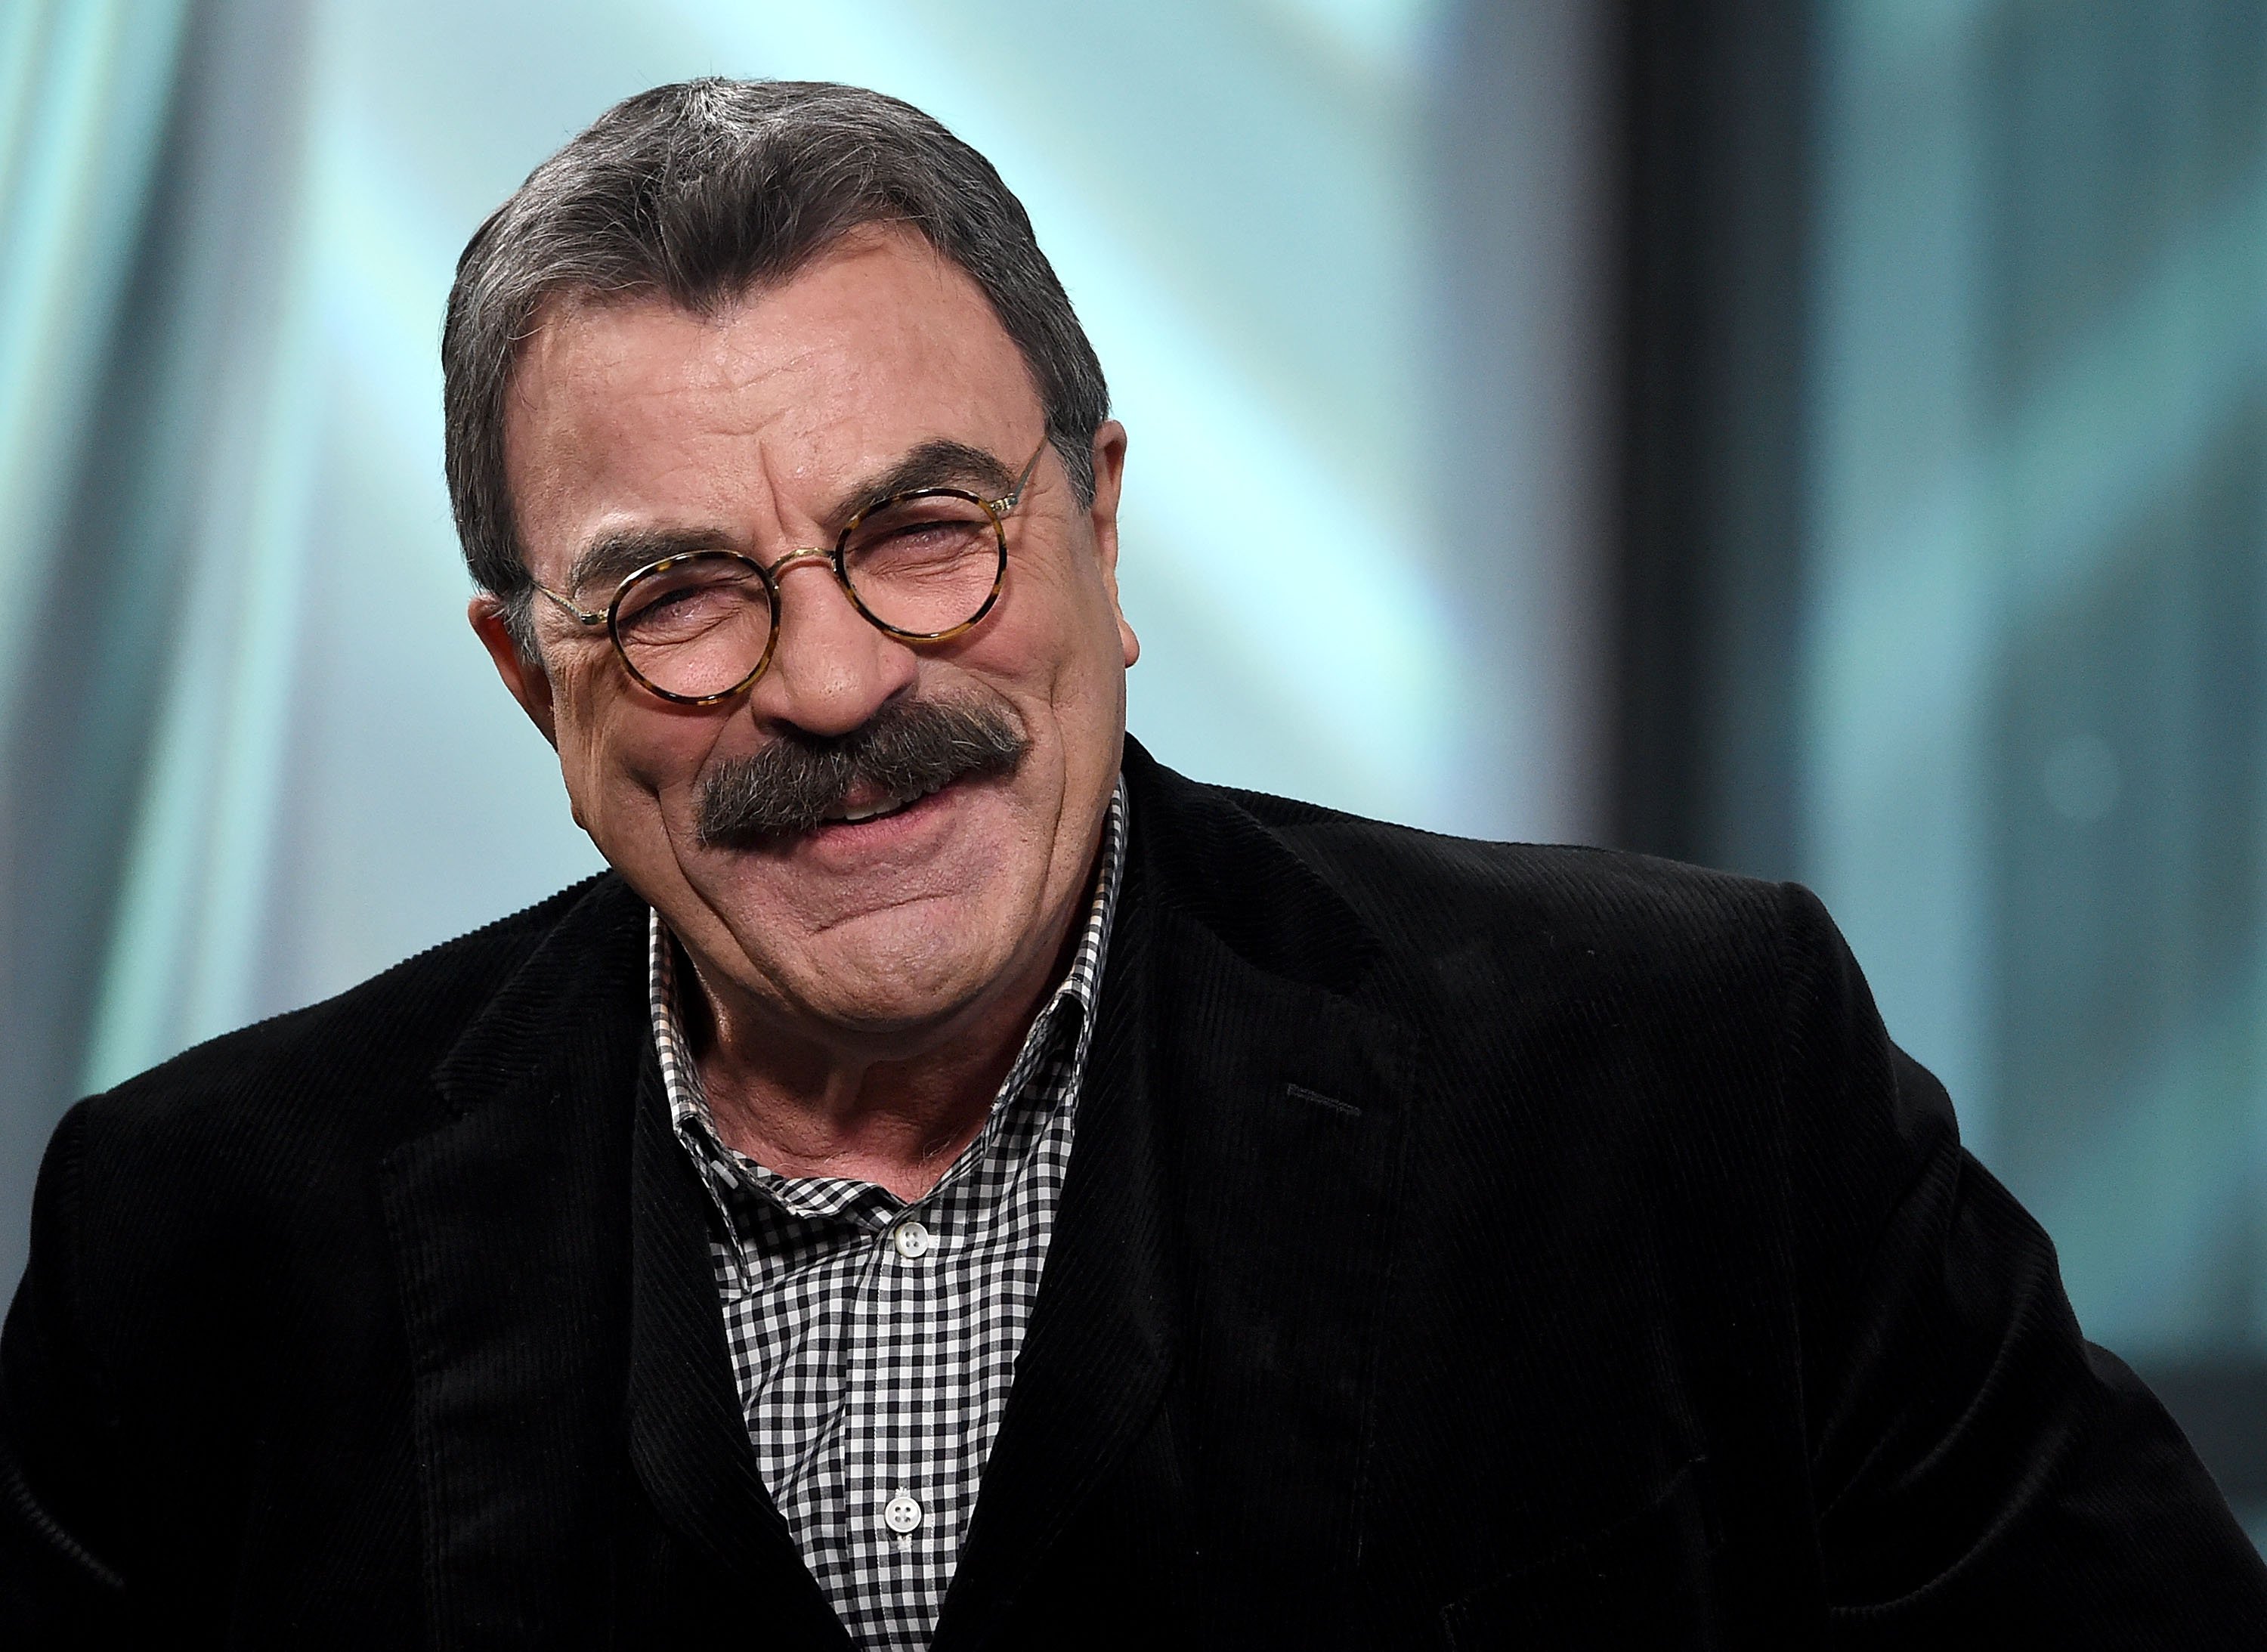 Tom Selleck visits the Build Series to discuss his show "Blue Bloods at Build Studio on September 29, 2017 | Photo: GettyImages